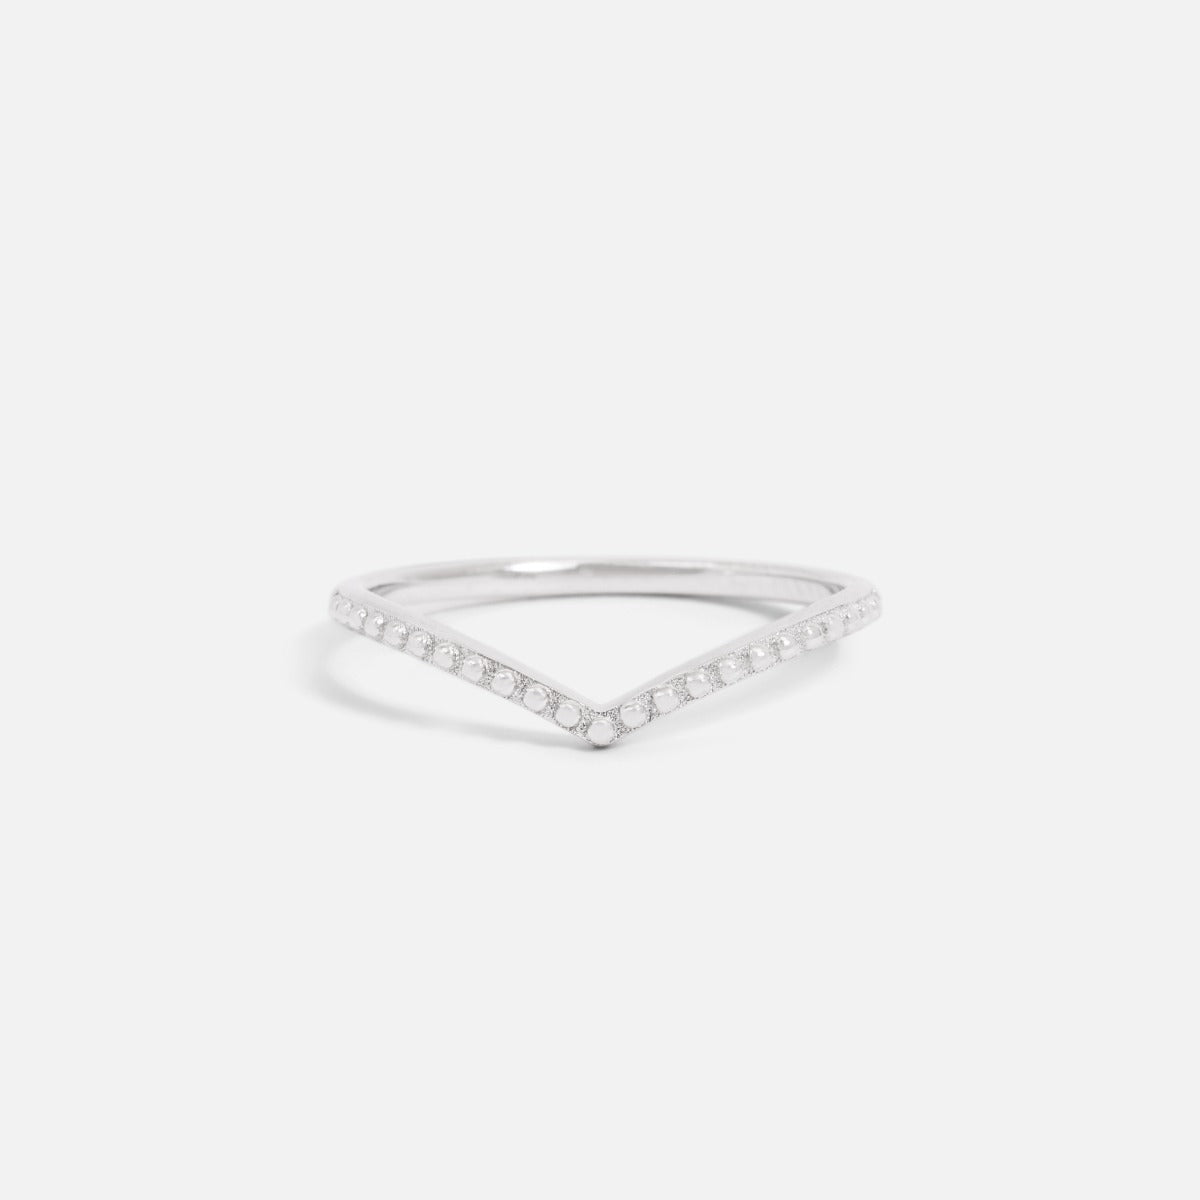 Sterling silver v shaped ring with beads effect